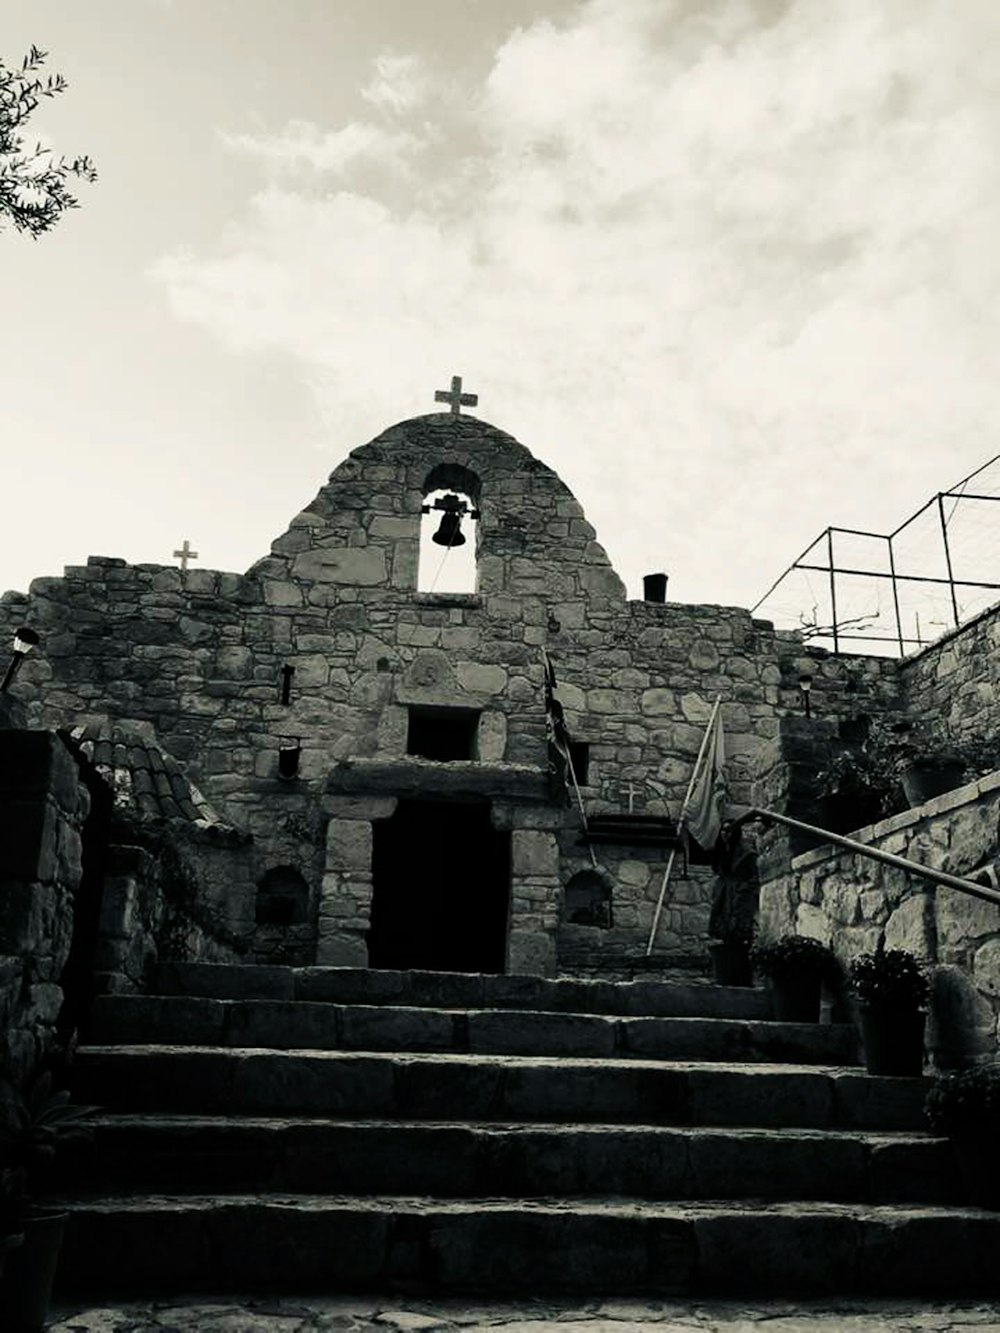 a black and white photo of a church with a bell